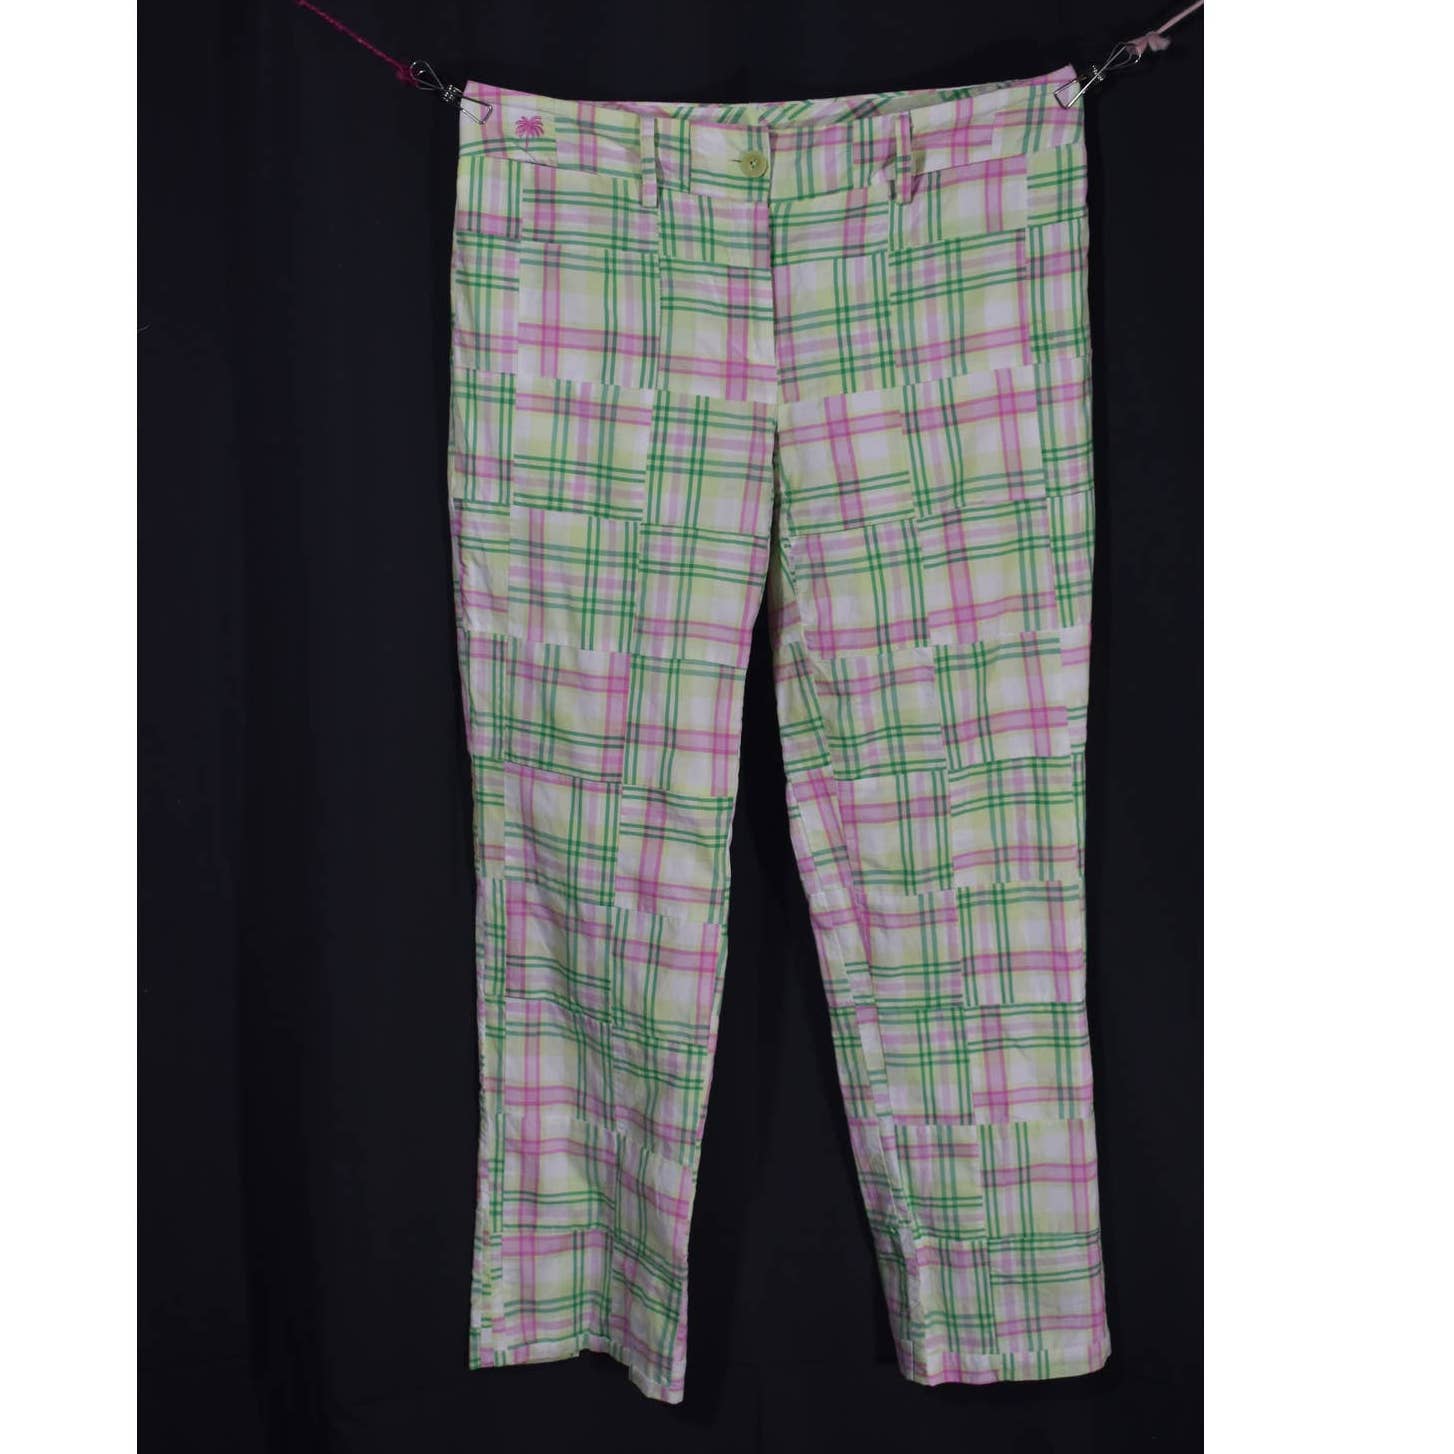 Lilly Pulitzer Green and Pink Plaid Pants- 4